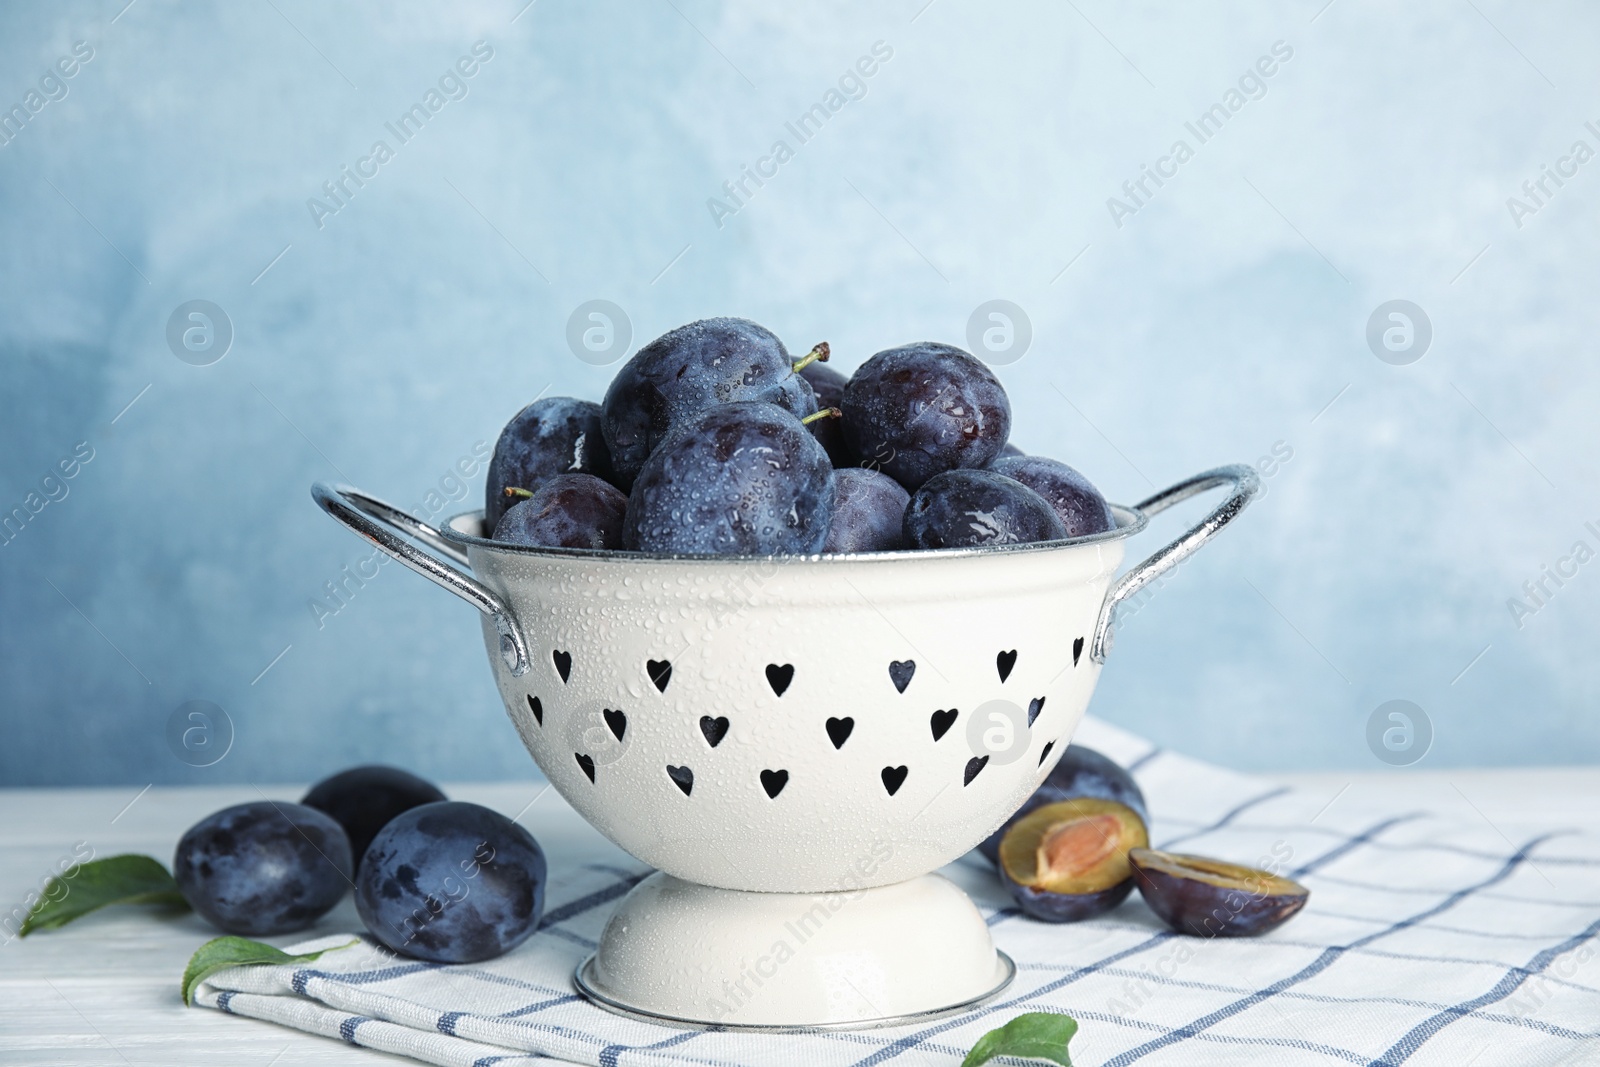 Photo of Delicious ripe plums in colander on table against light background